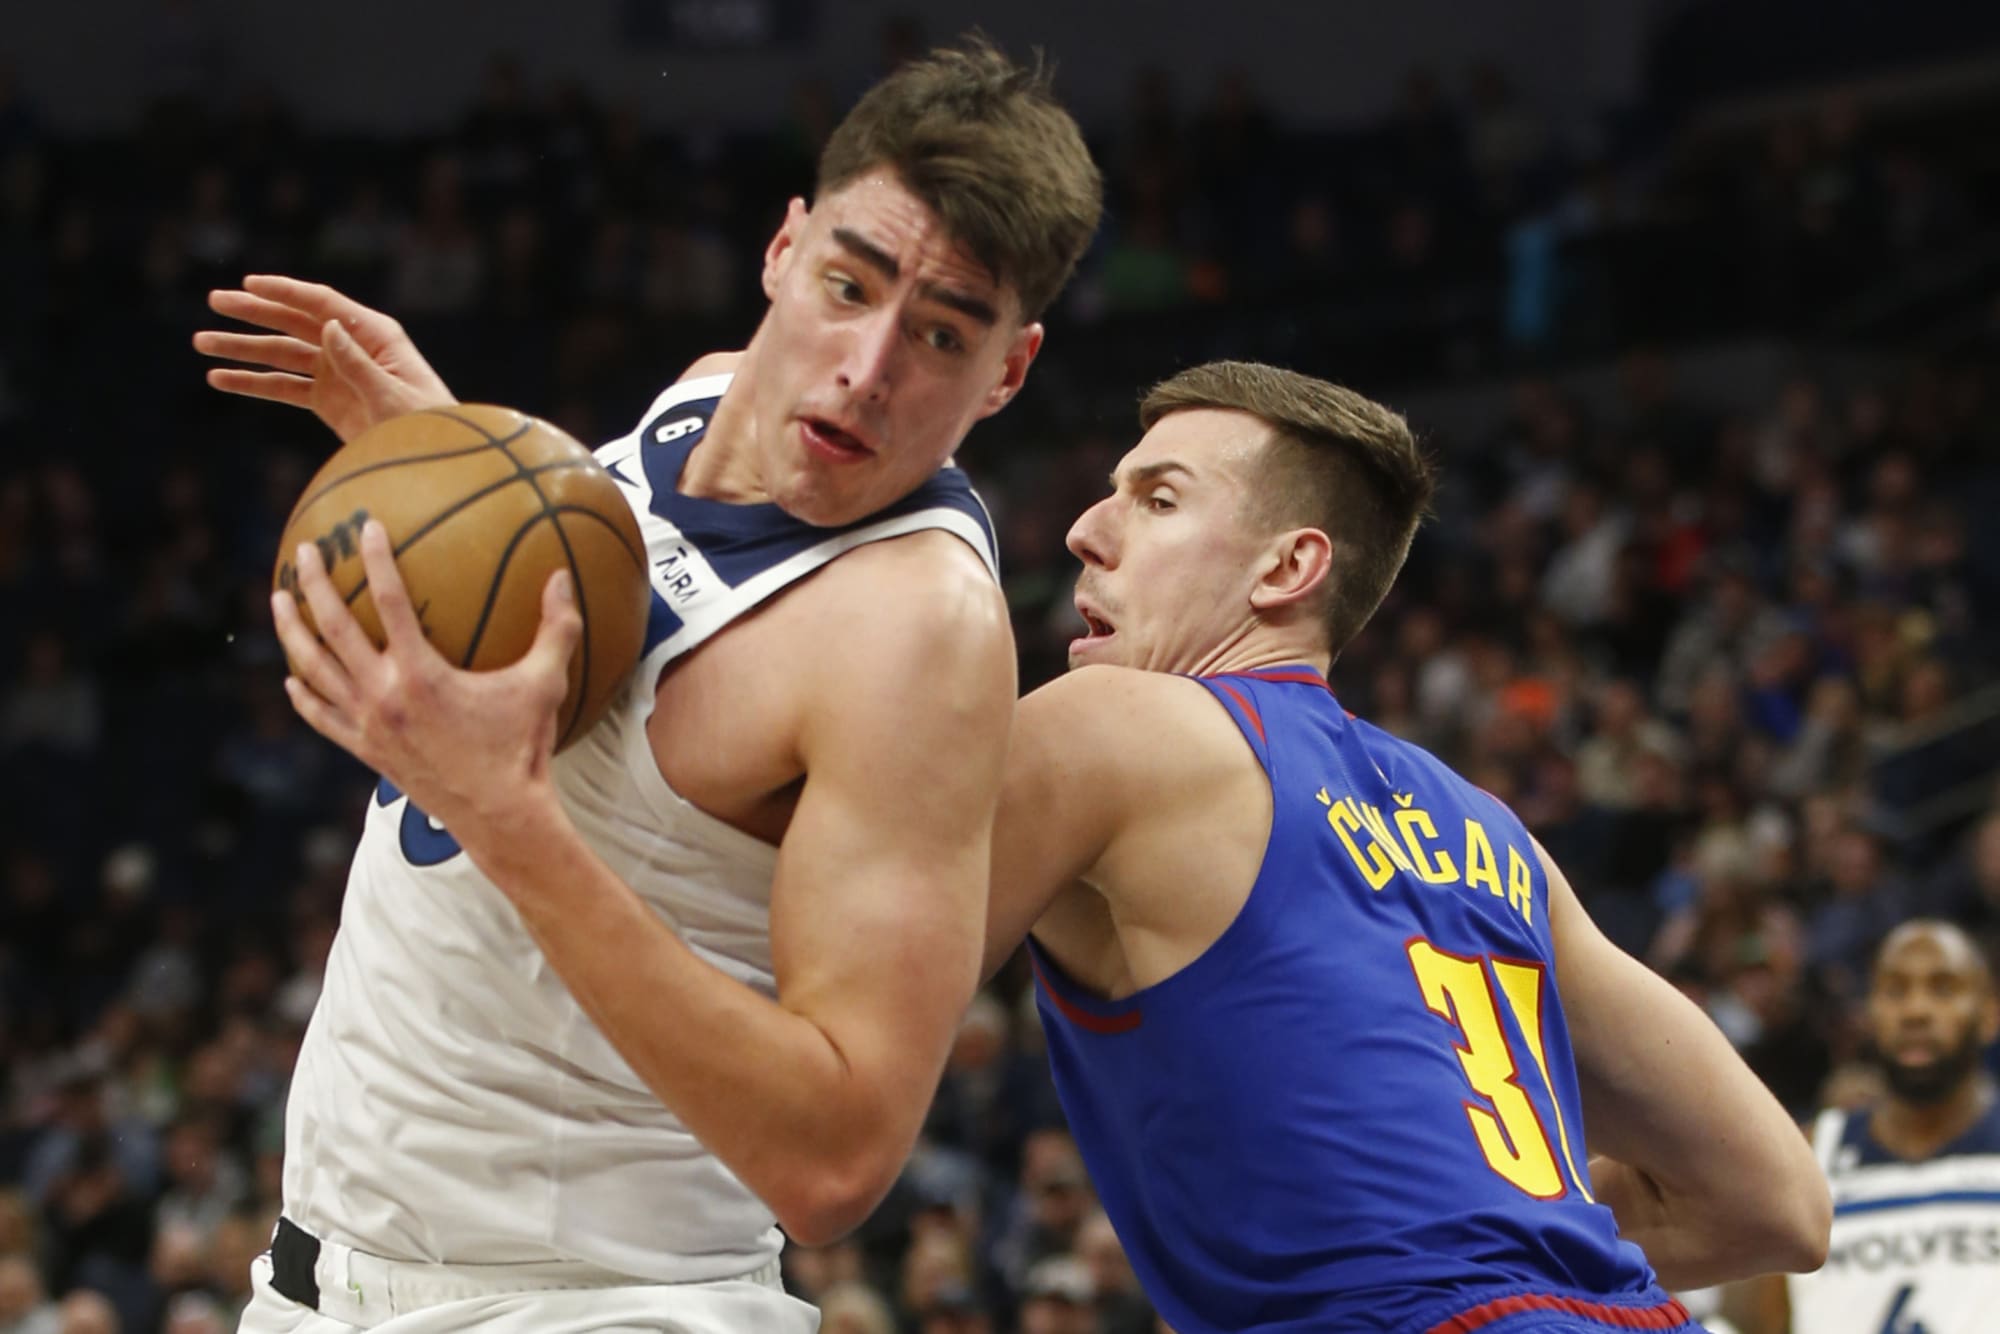 Lookie there, Luka Garza helps Timberwolves take down division's best